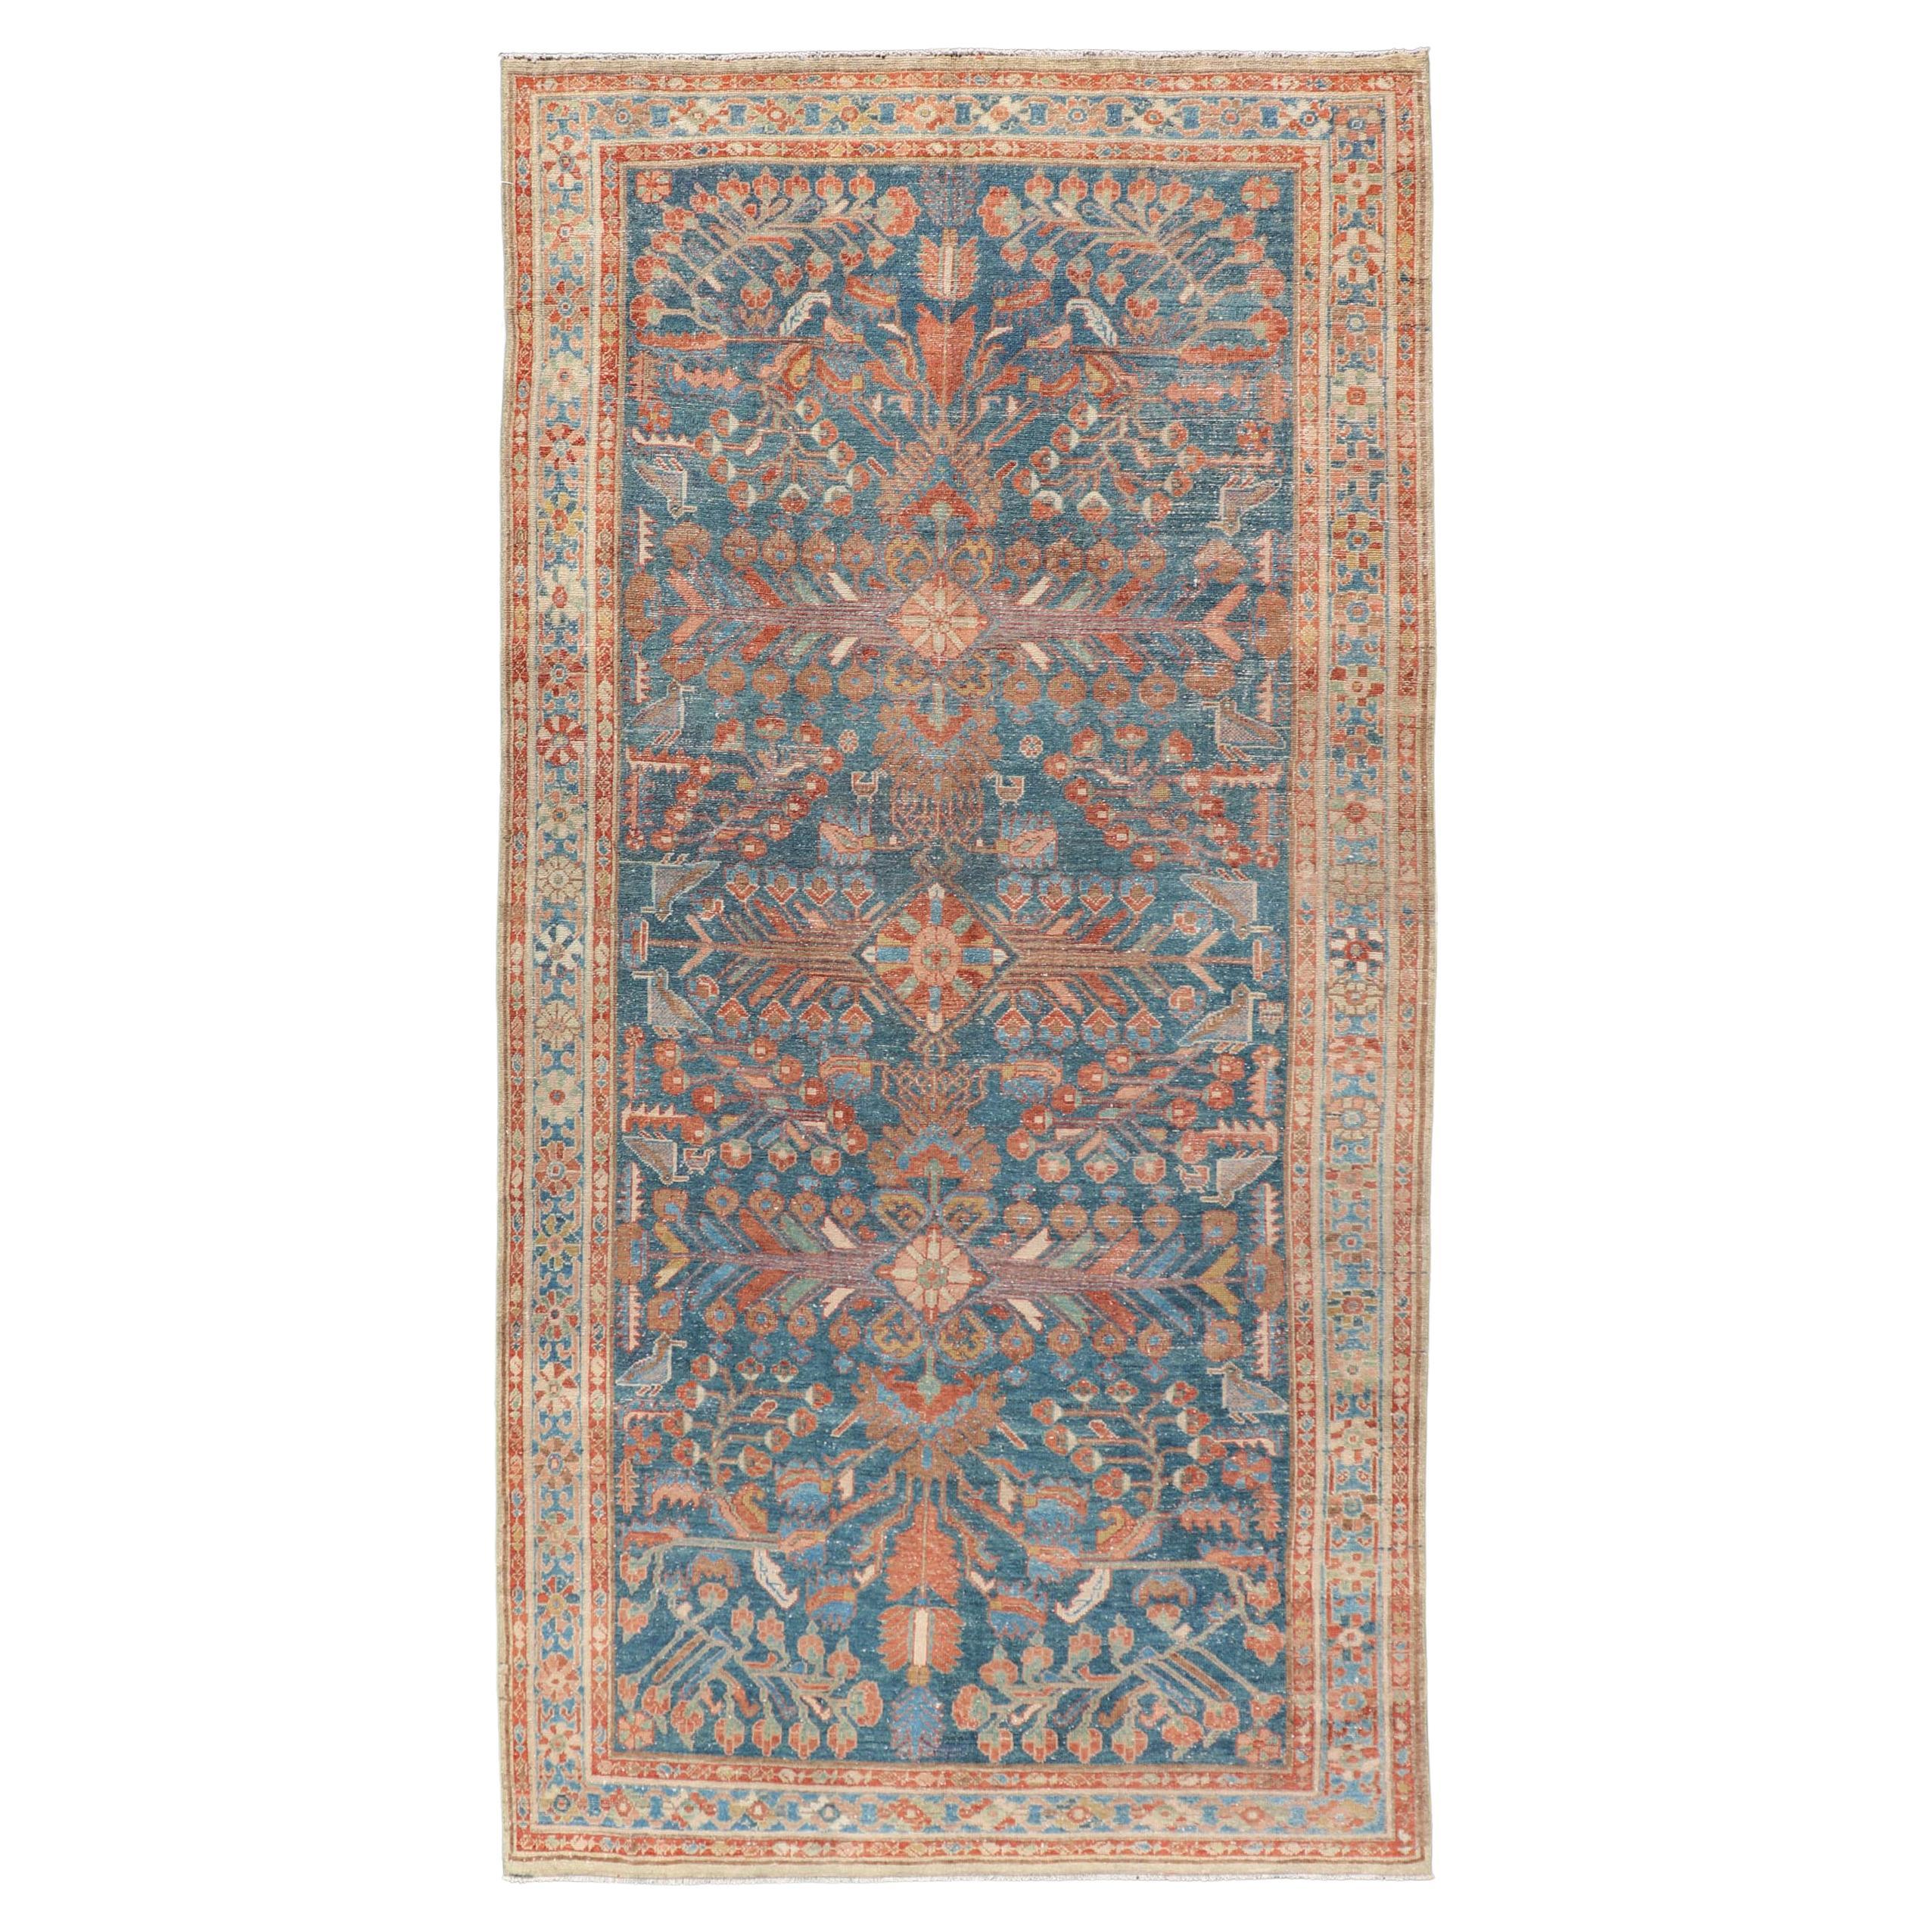 Antique Malayer Rug with Floral Medallion Design in Blue and Cream 